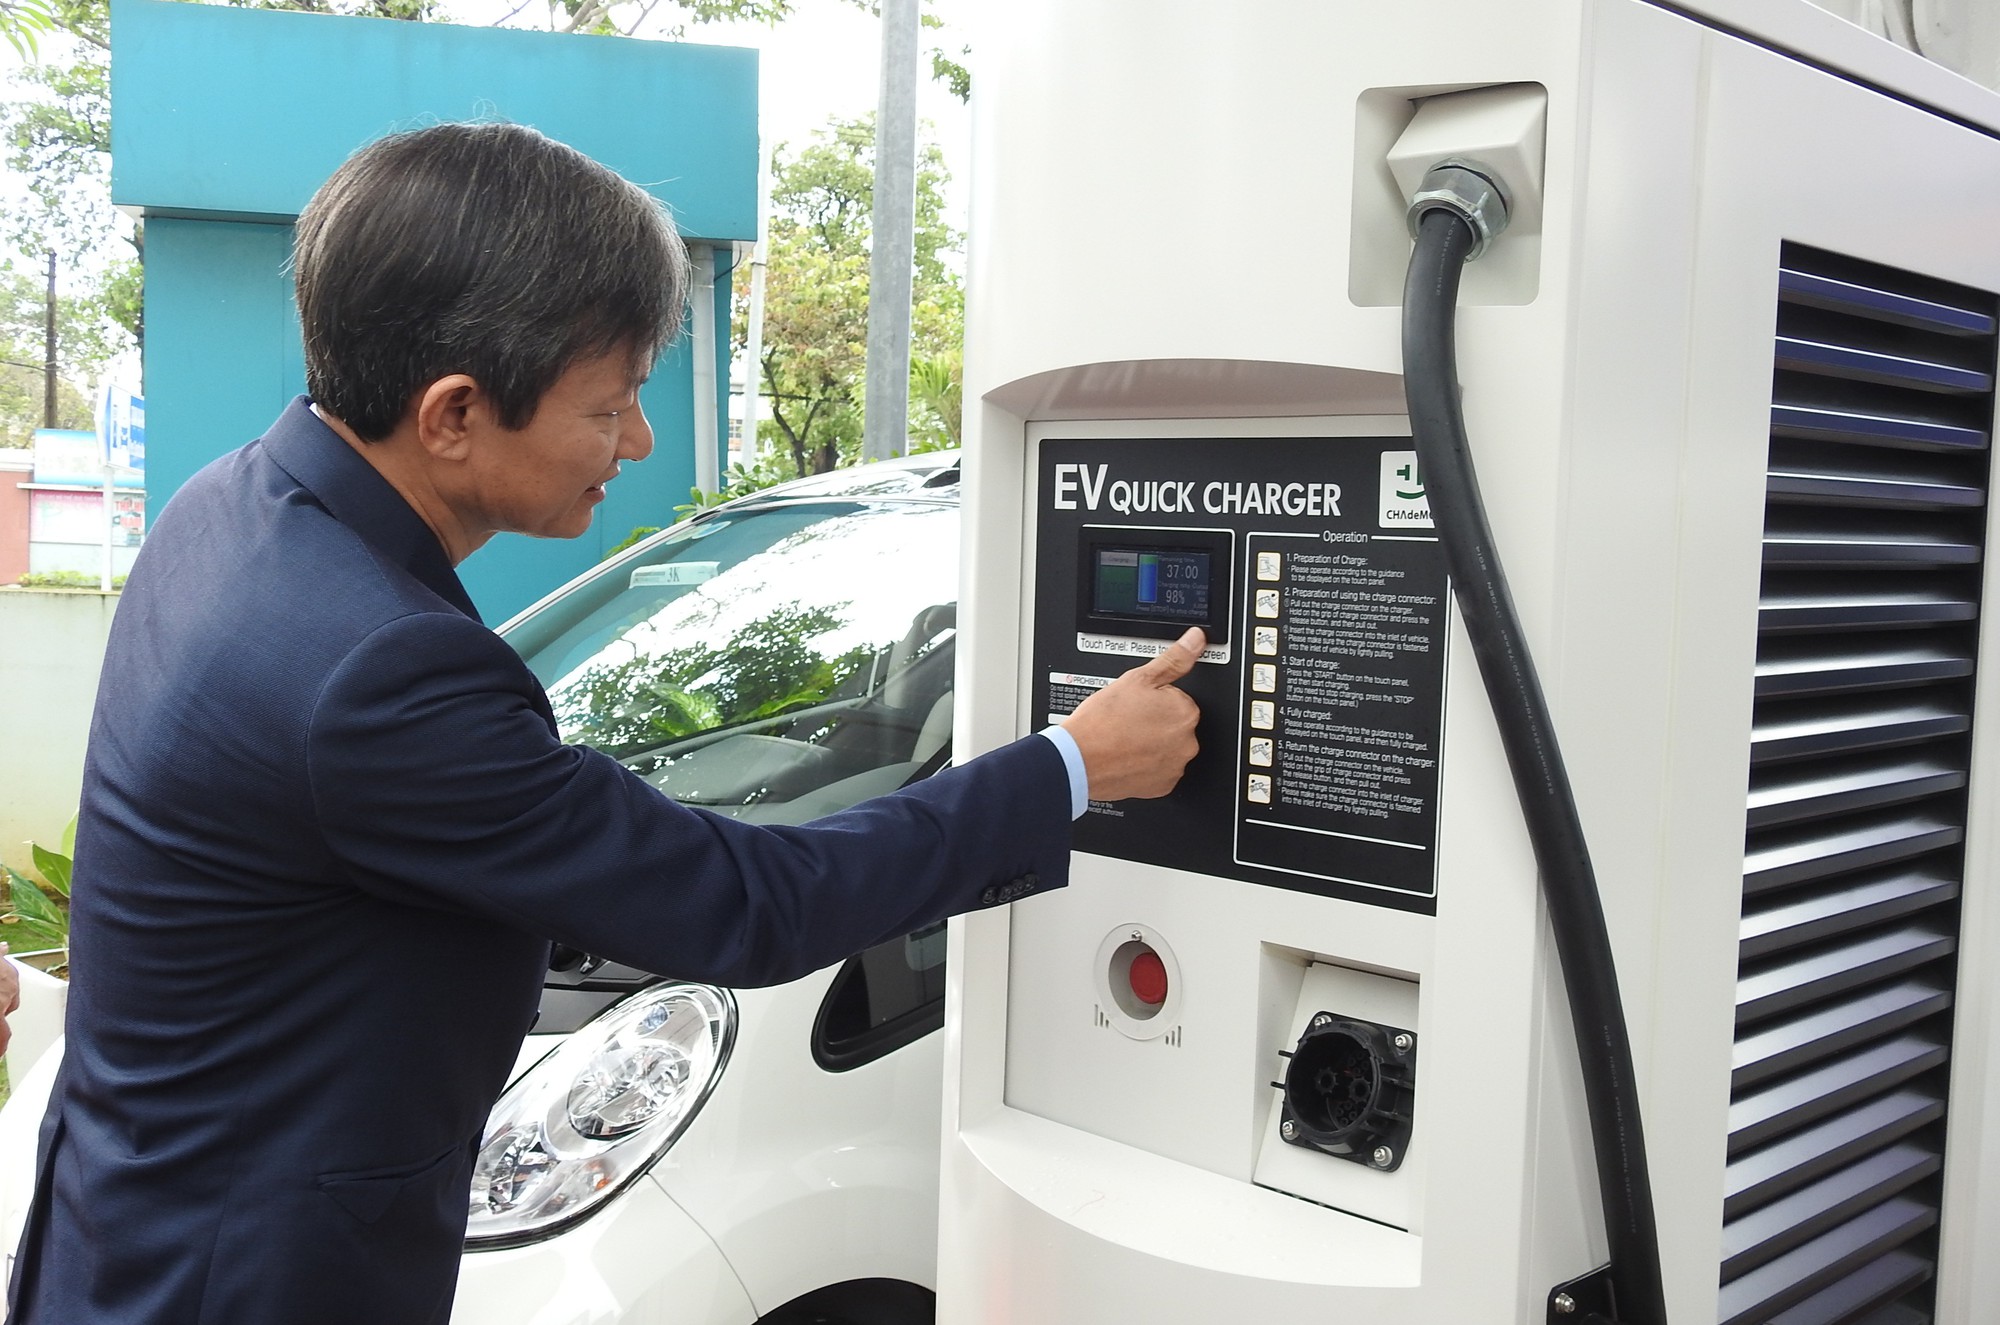 Tran Dinh Nhan operates the electric vehicle quick charger. Photo: Tuoi Tre